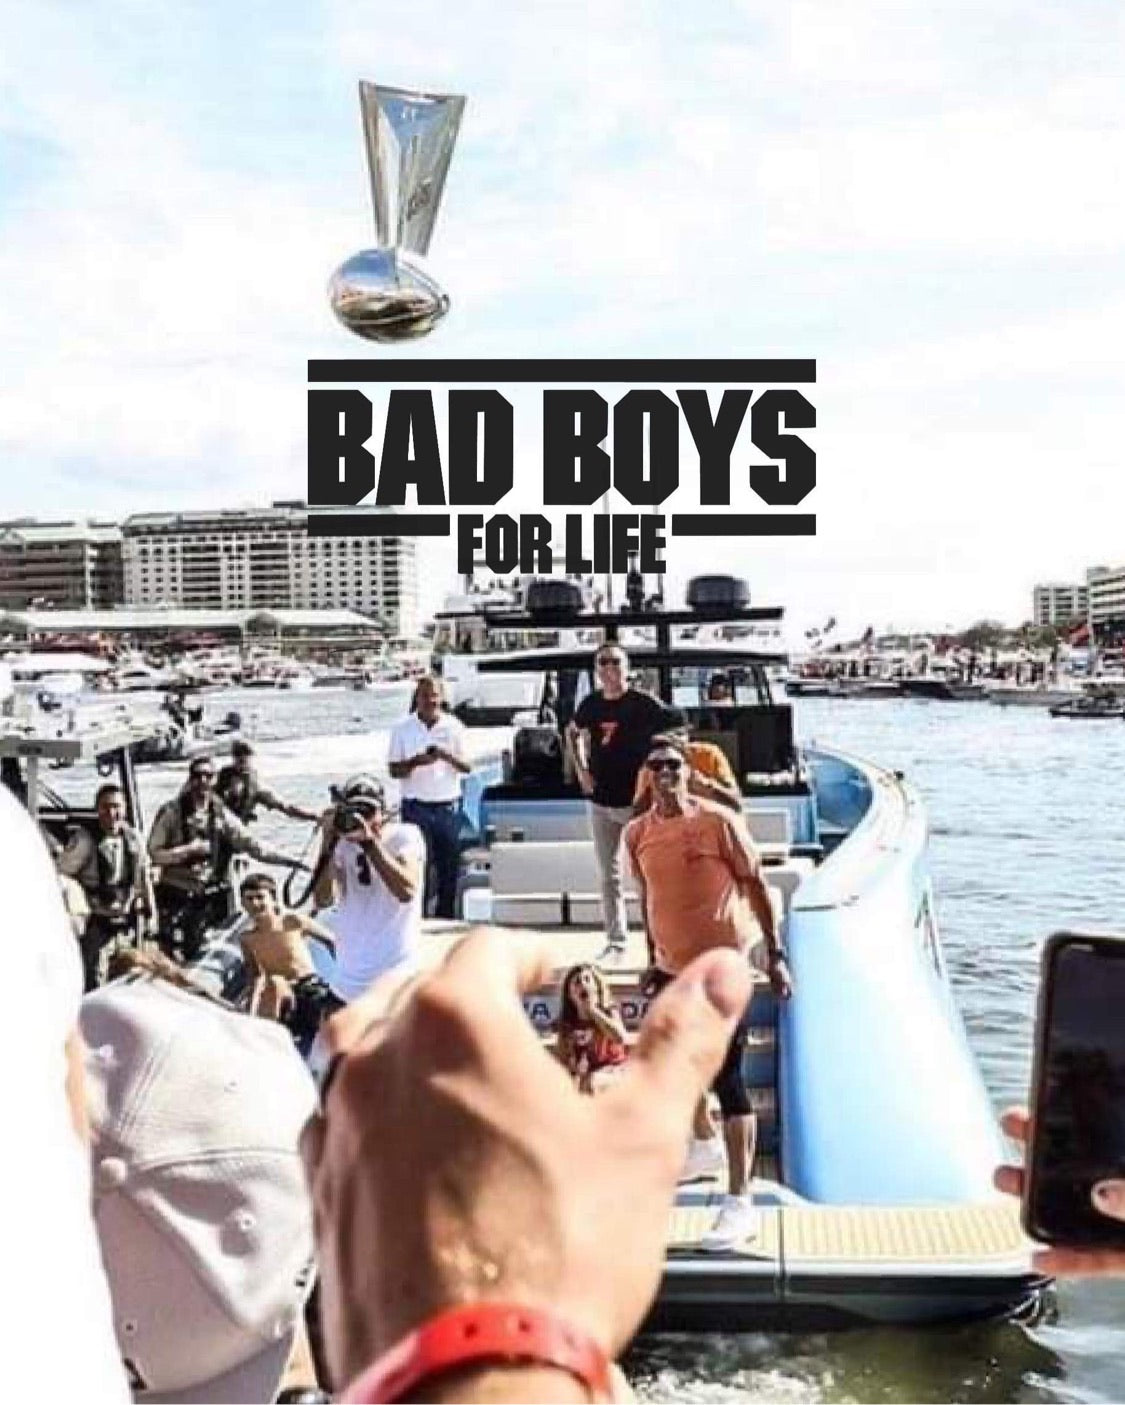 BAD BOYS FOR LIFE - WHITE FRONT ONLY